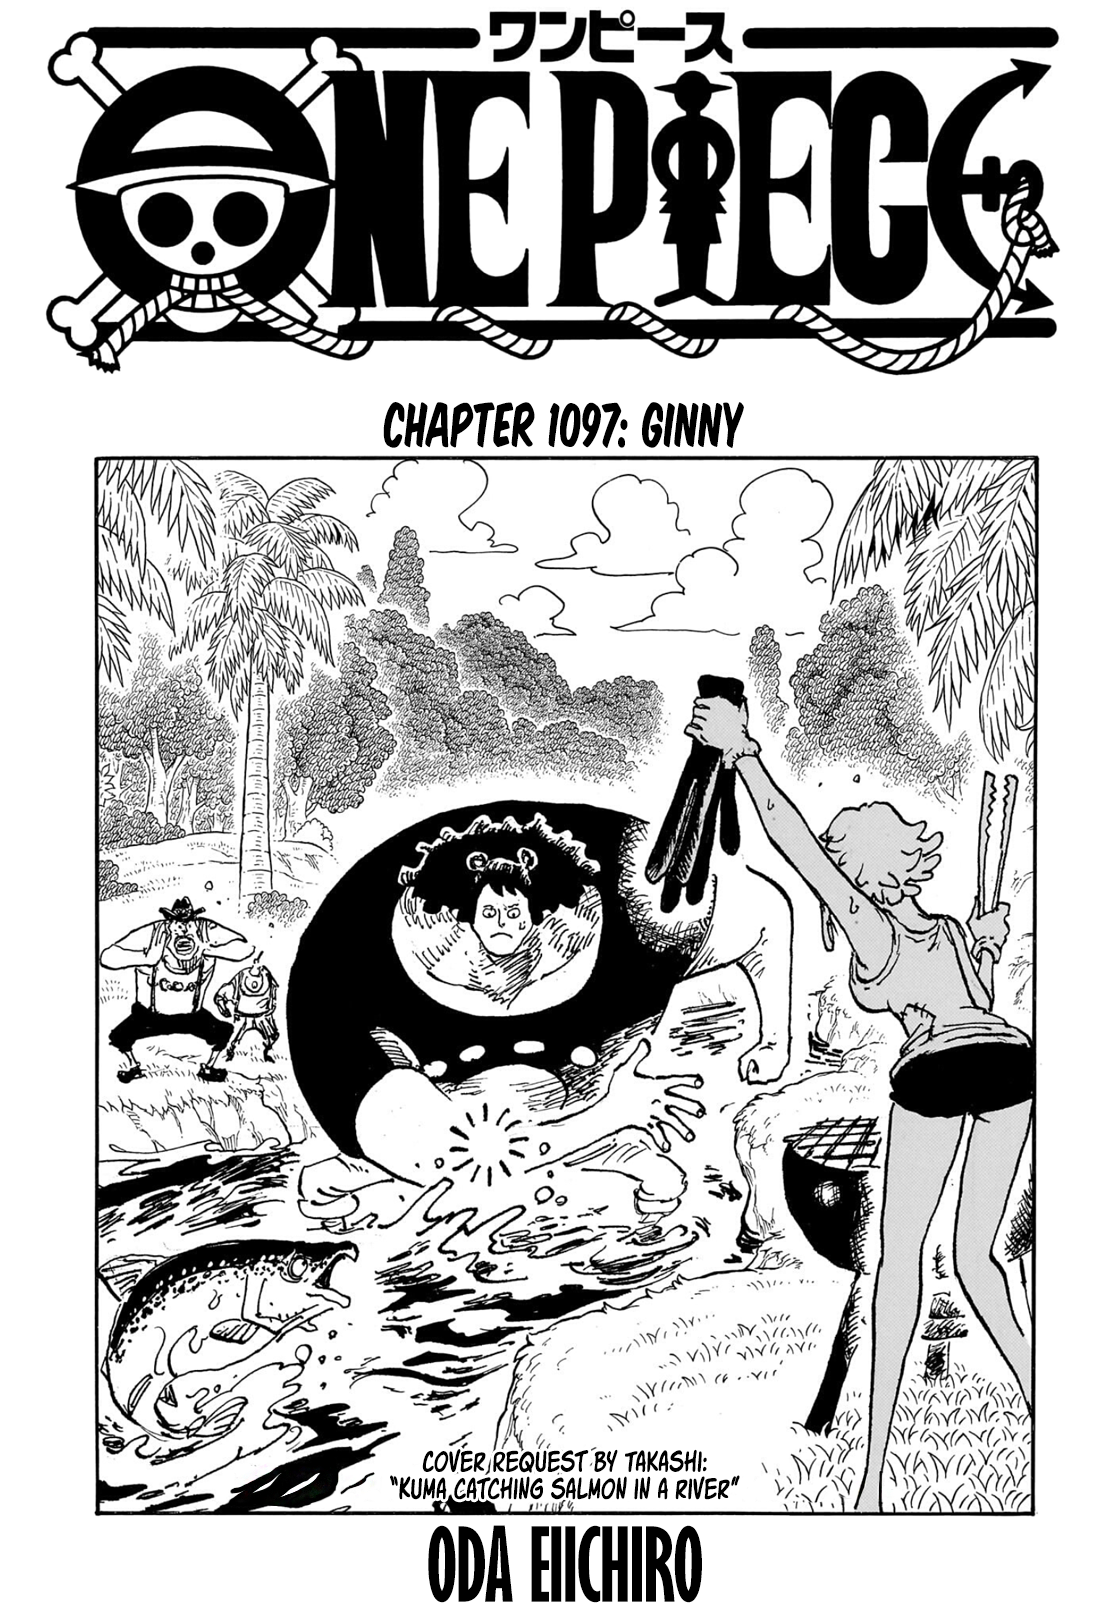 Spoiler - One Piece Chapter 1065 Spoilers Discussion, Page 470